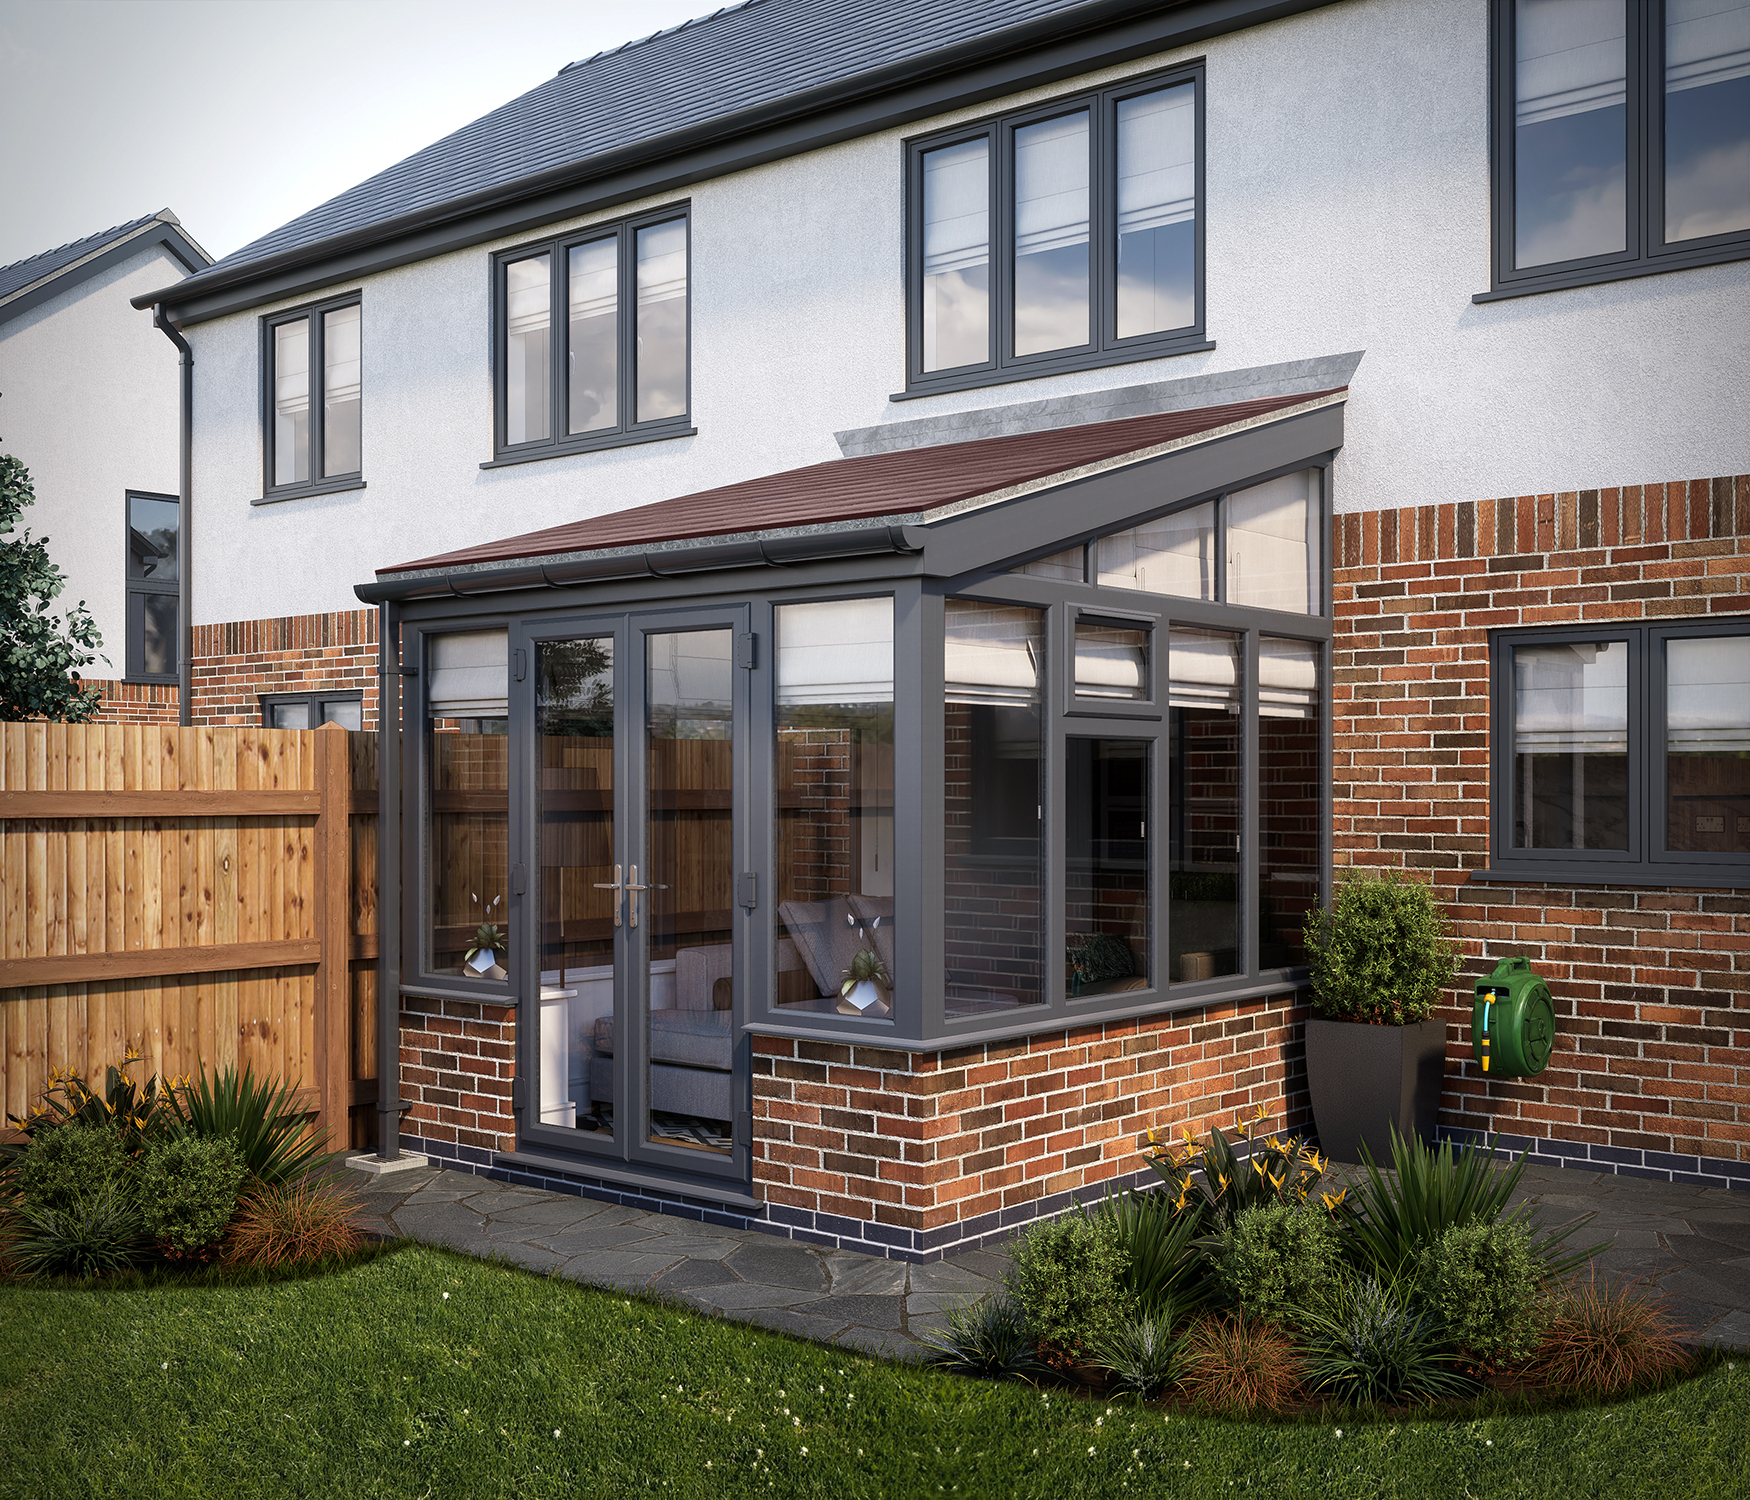 SOLid roof Lean to Conservatory Grey Frames Dwarf Wall with Rustic Brown Tiles